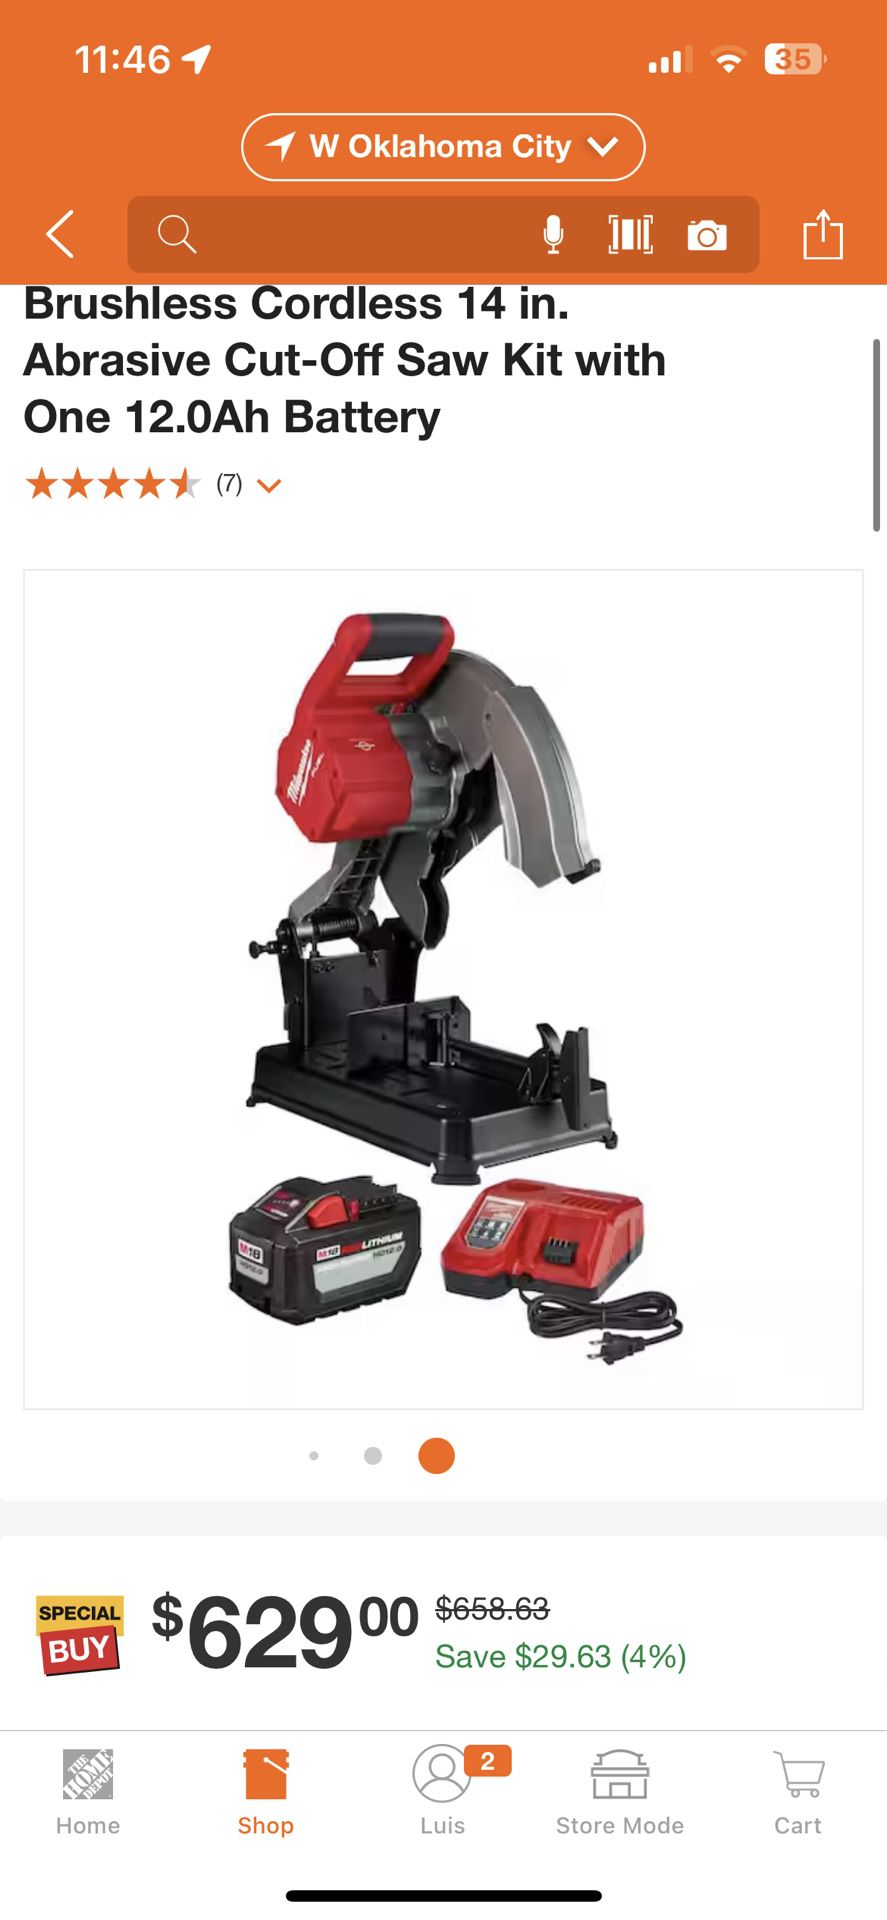 Milwaukee (Brand Rating: 4.6/5) M18 FUEL 18-Volt Lithium-Ion Brushless  Cordless 14 in. Abrasive Cut-Off Saw Kit with One 12.0Ah Battery for Sale  in Oklahoma City, OK OfferUp